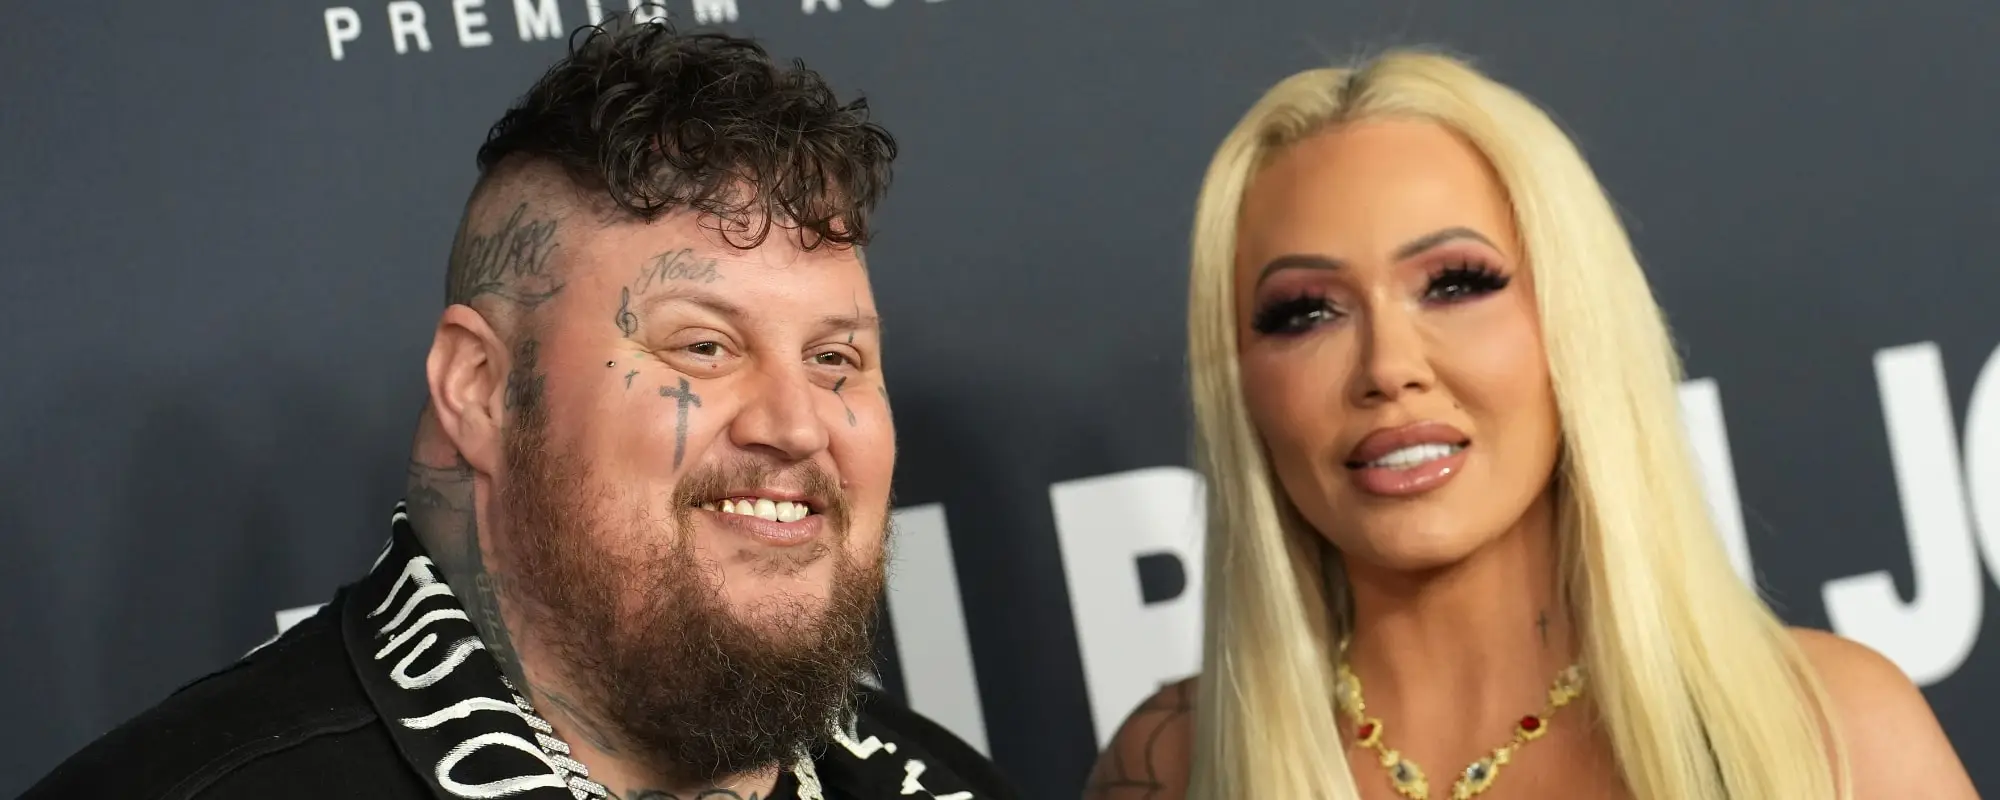 Jelly Roll & Bunnie Xo’s Private Jet Forced To Make Emergency Landing en Route to CMT Music Awards